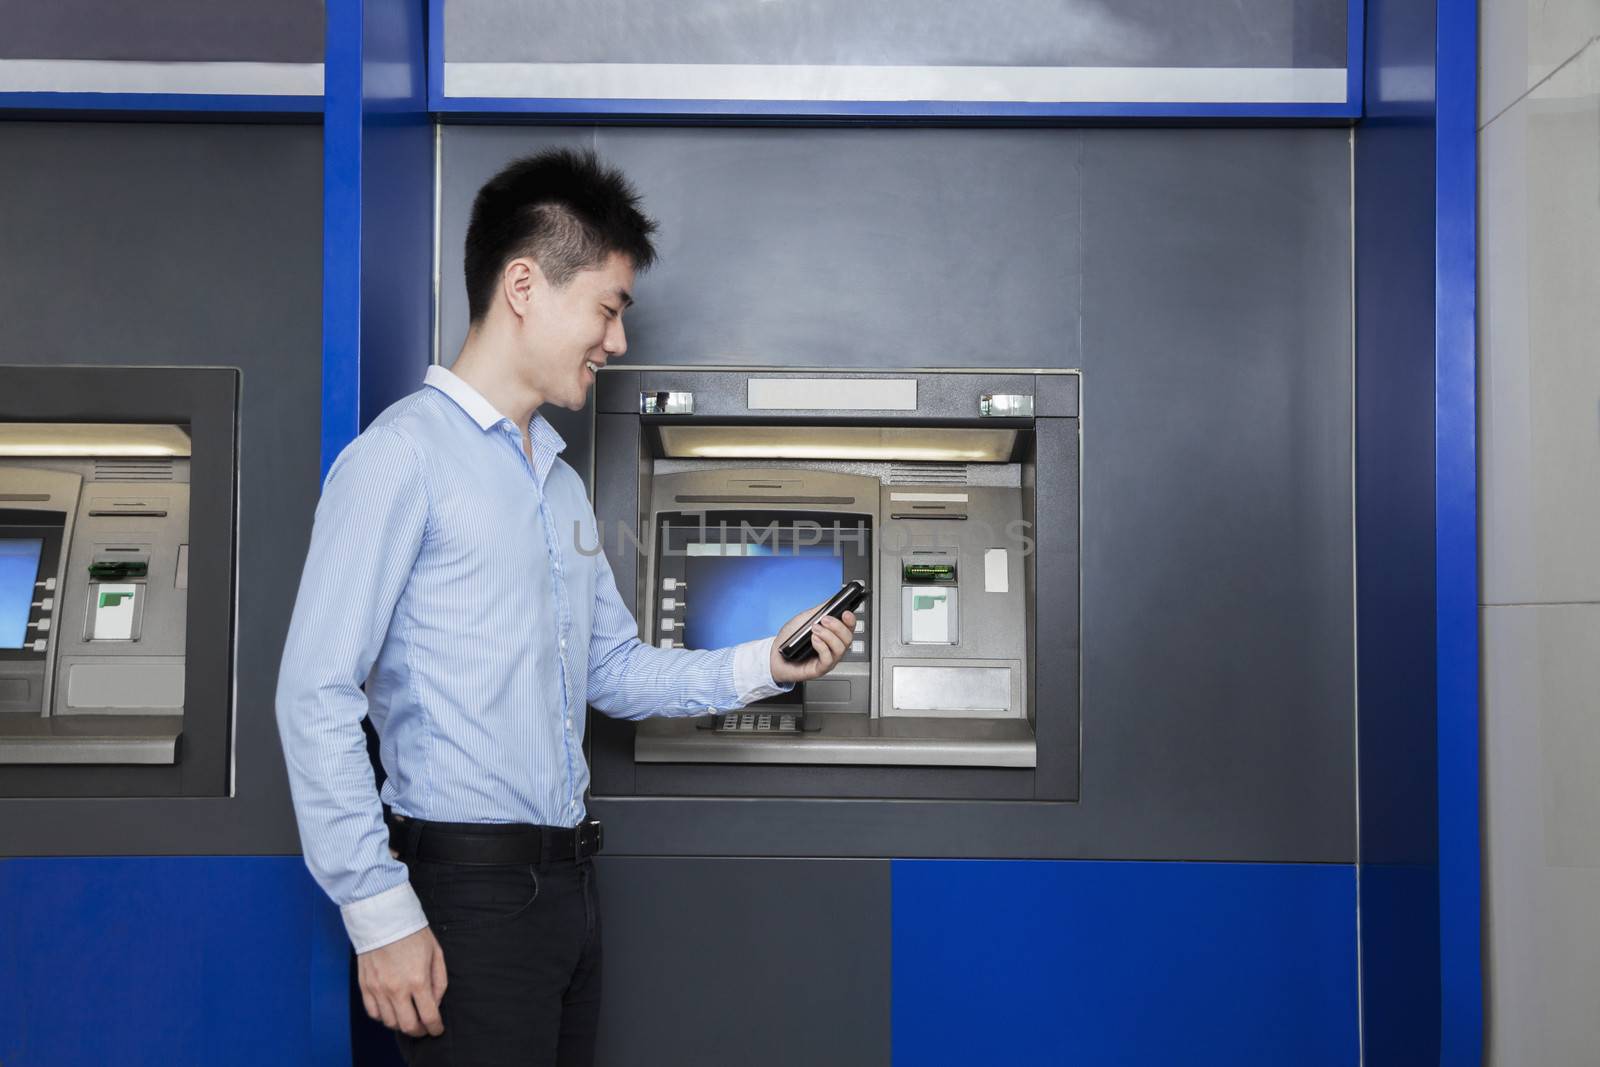 Smiling young businessman standing in front of an ATM and looking at his phone